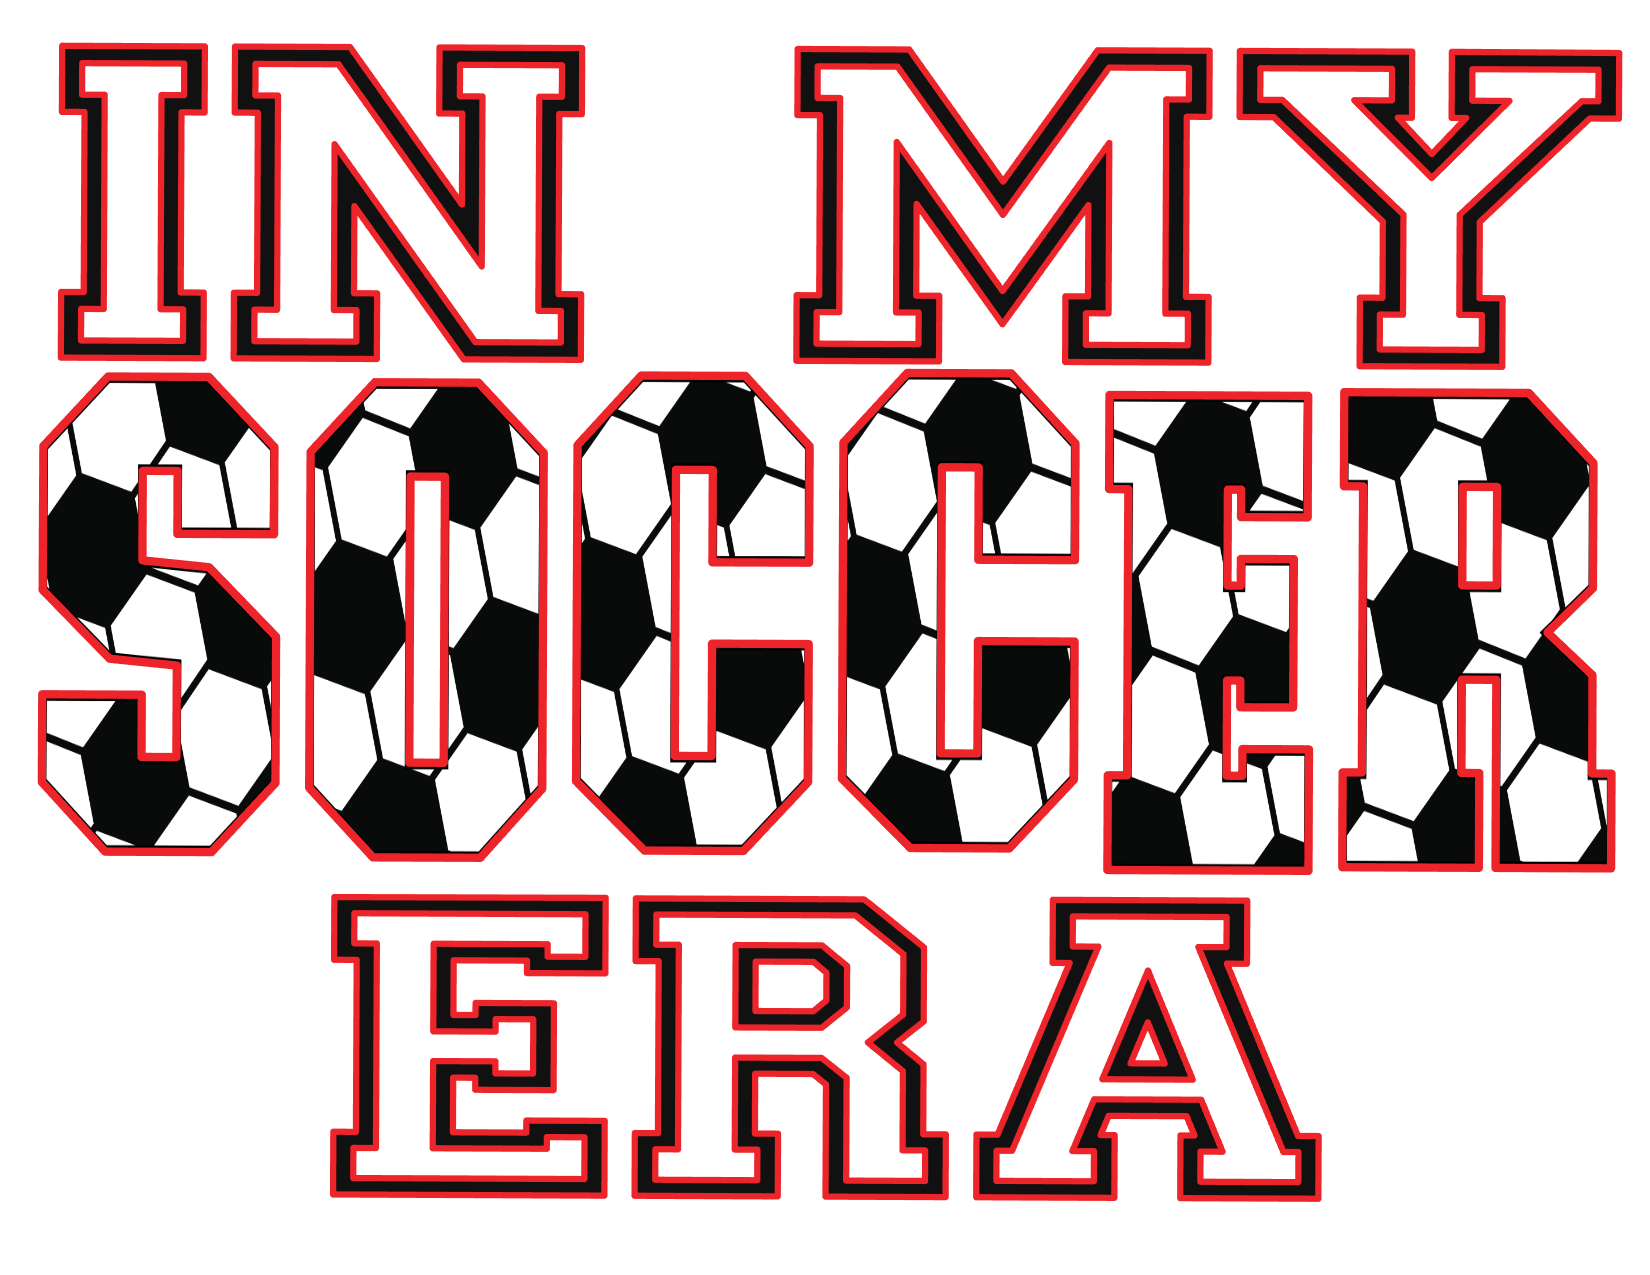 #381 In my Soccer Era (can be any color)